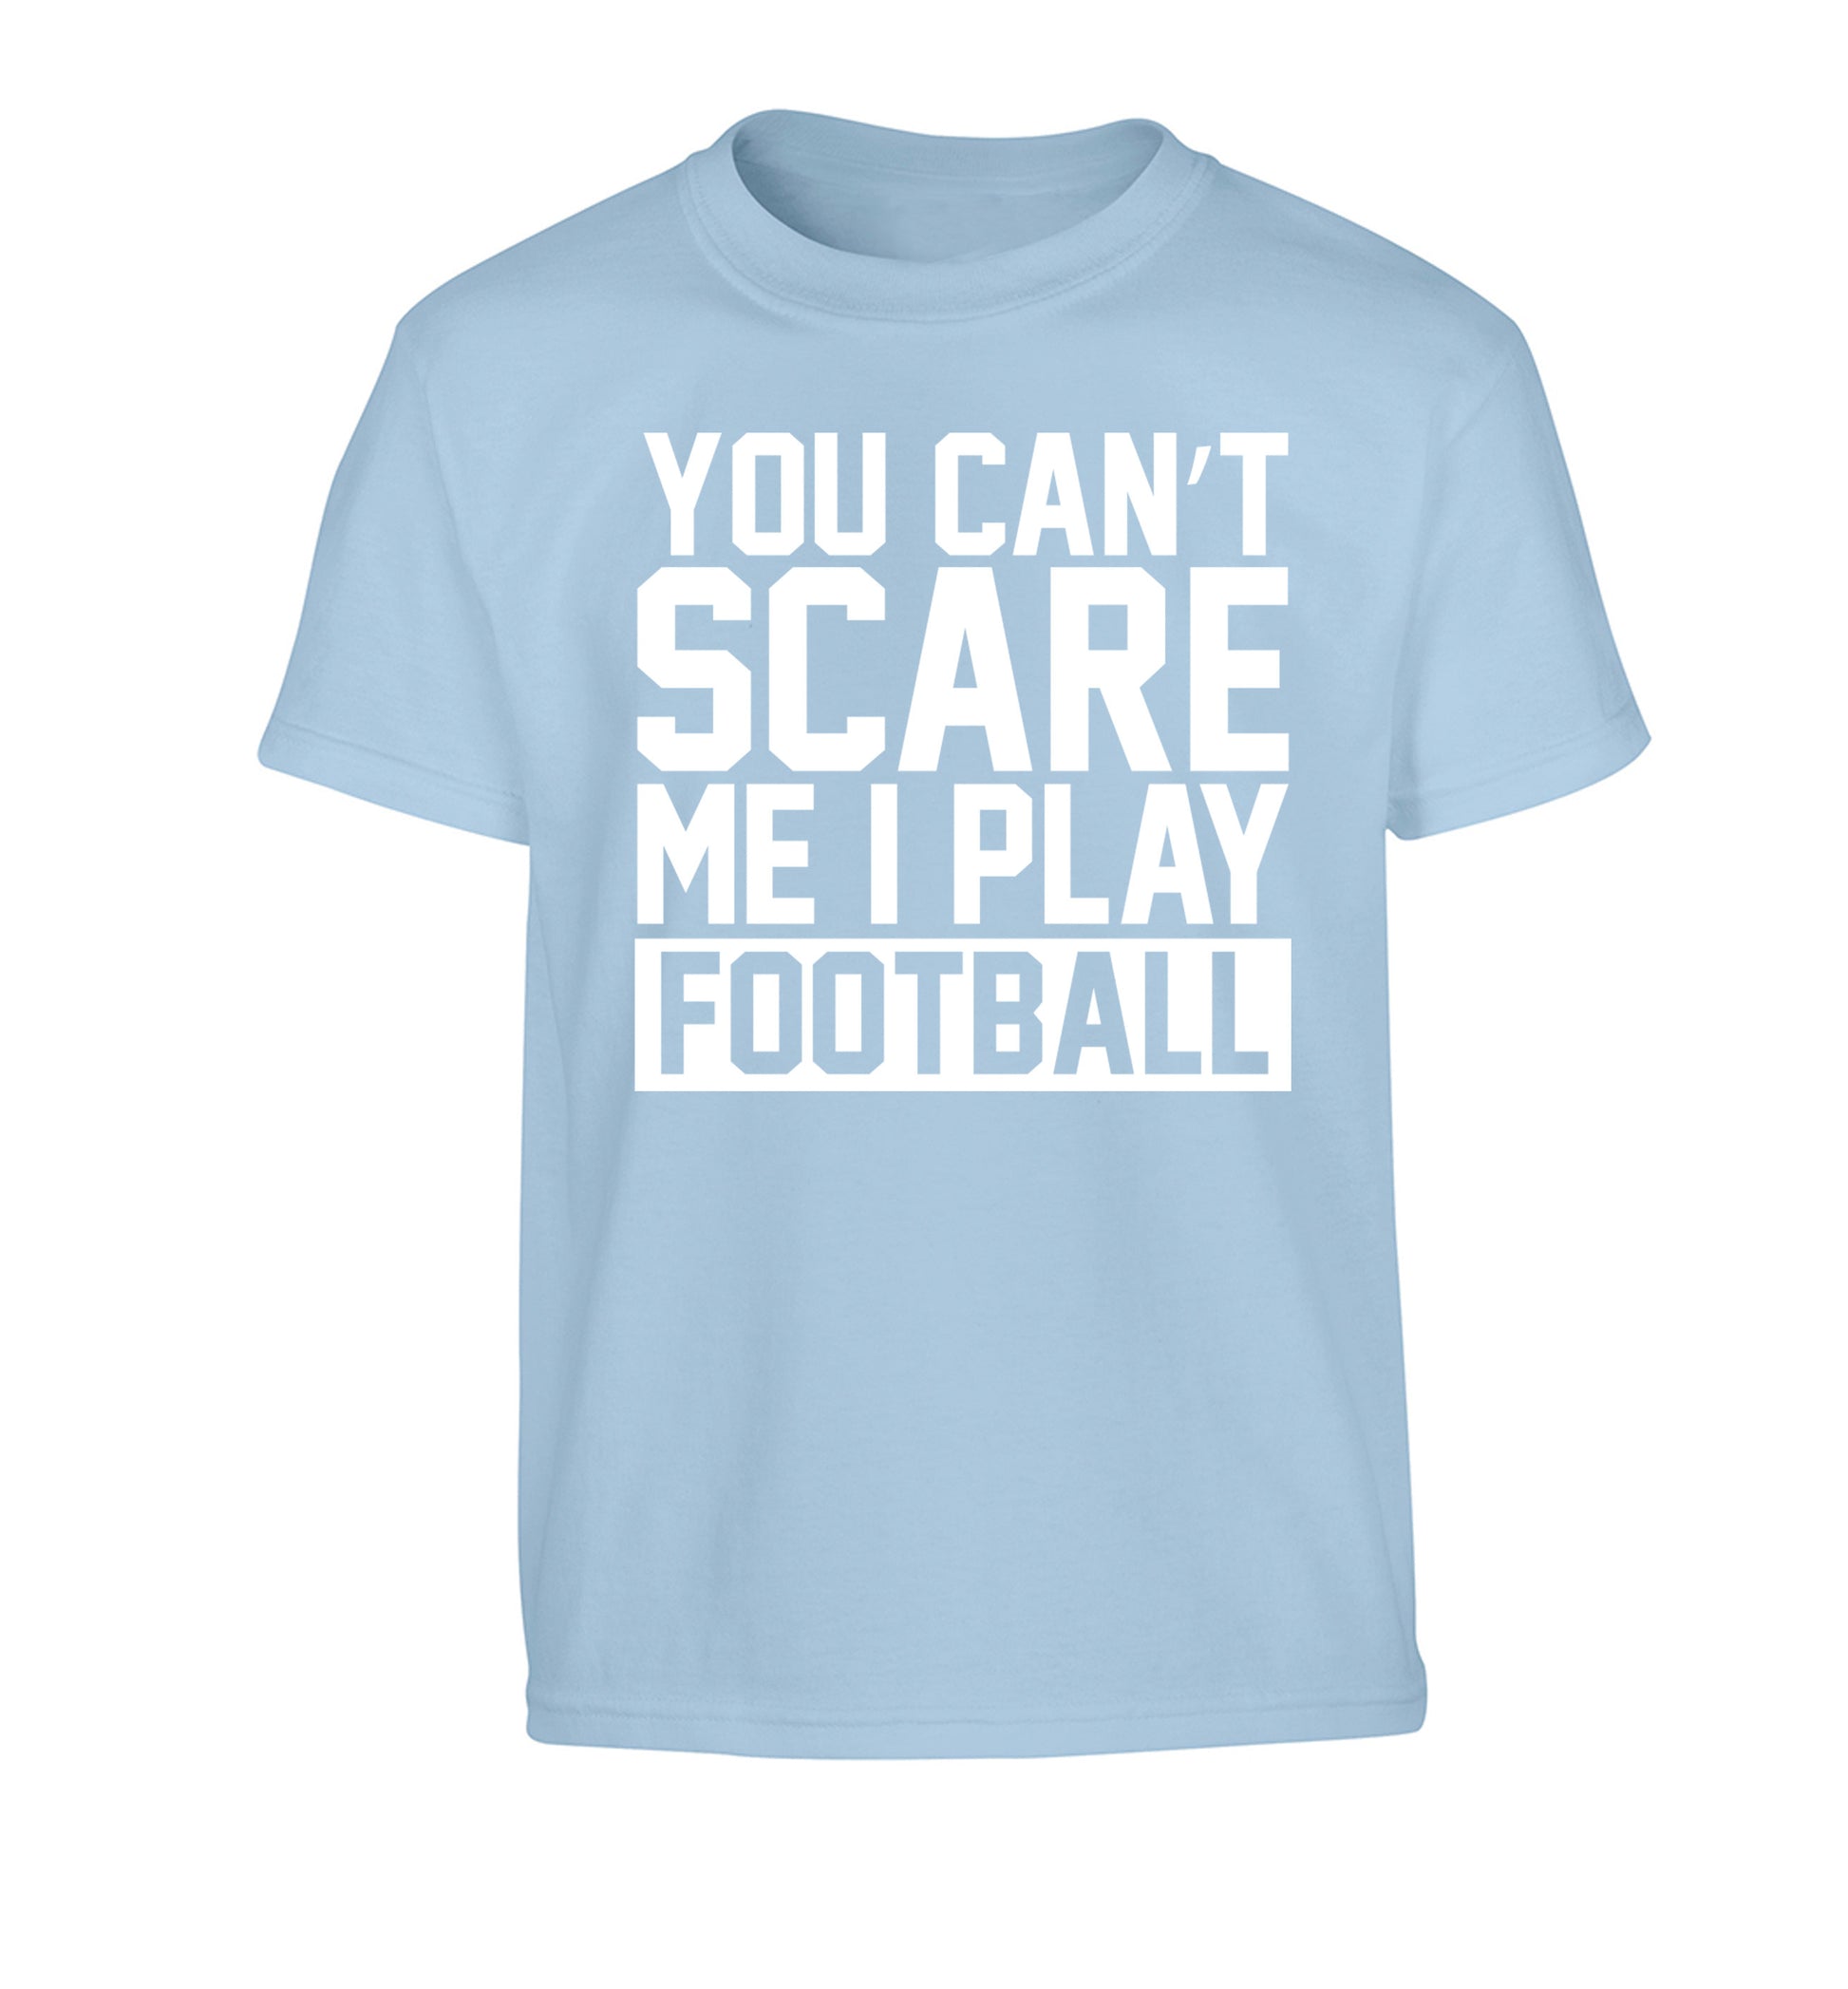 You can't scare me I play football Children's light blue Tshirt 12-14 Years